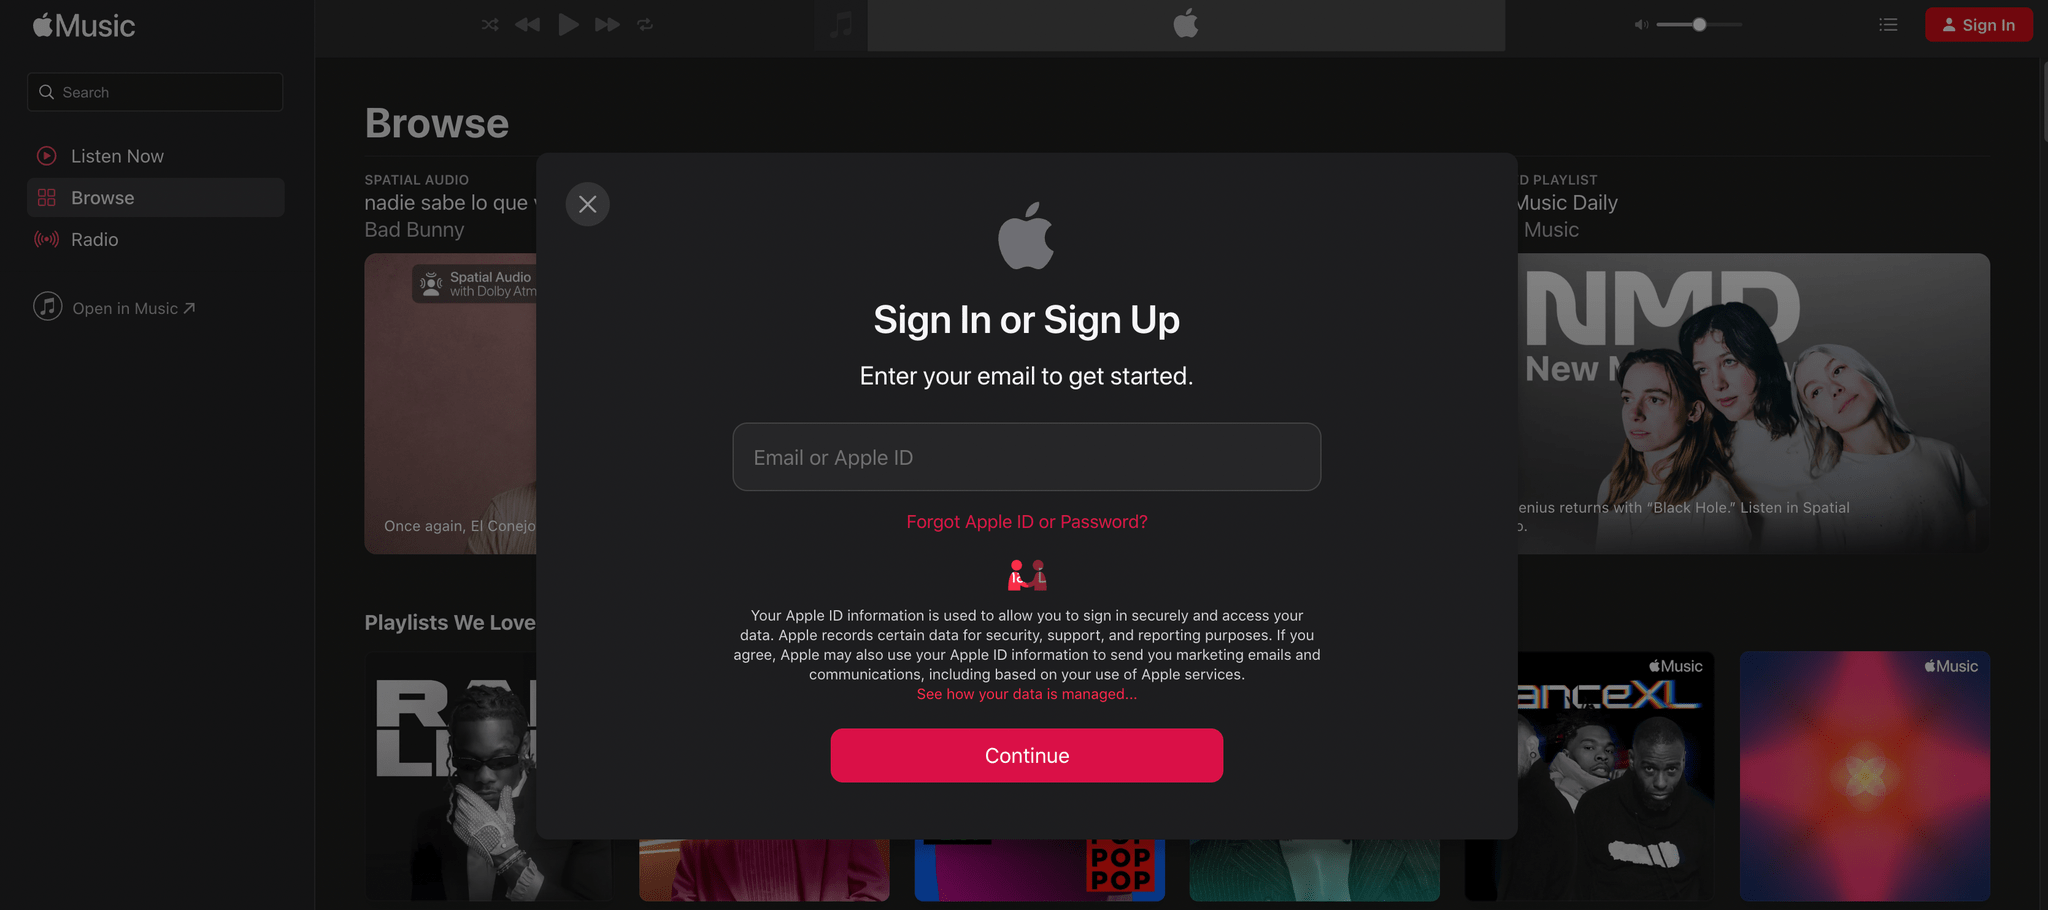 Sign in to Apple Music account on Mac